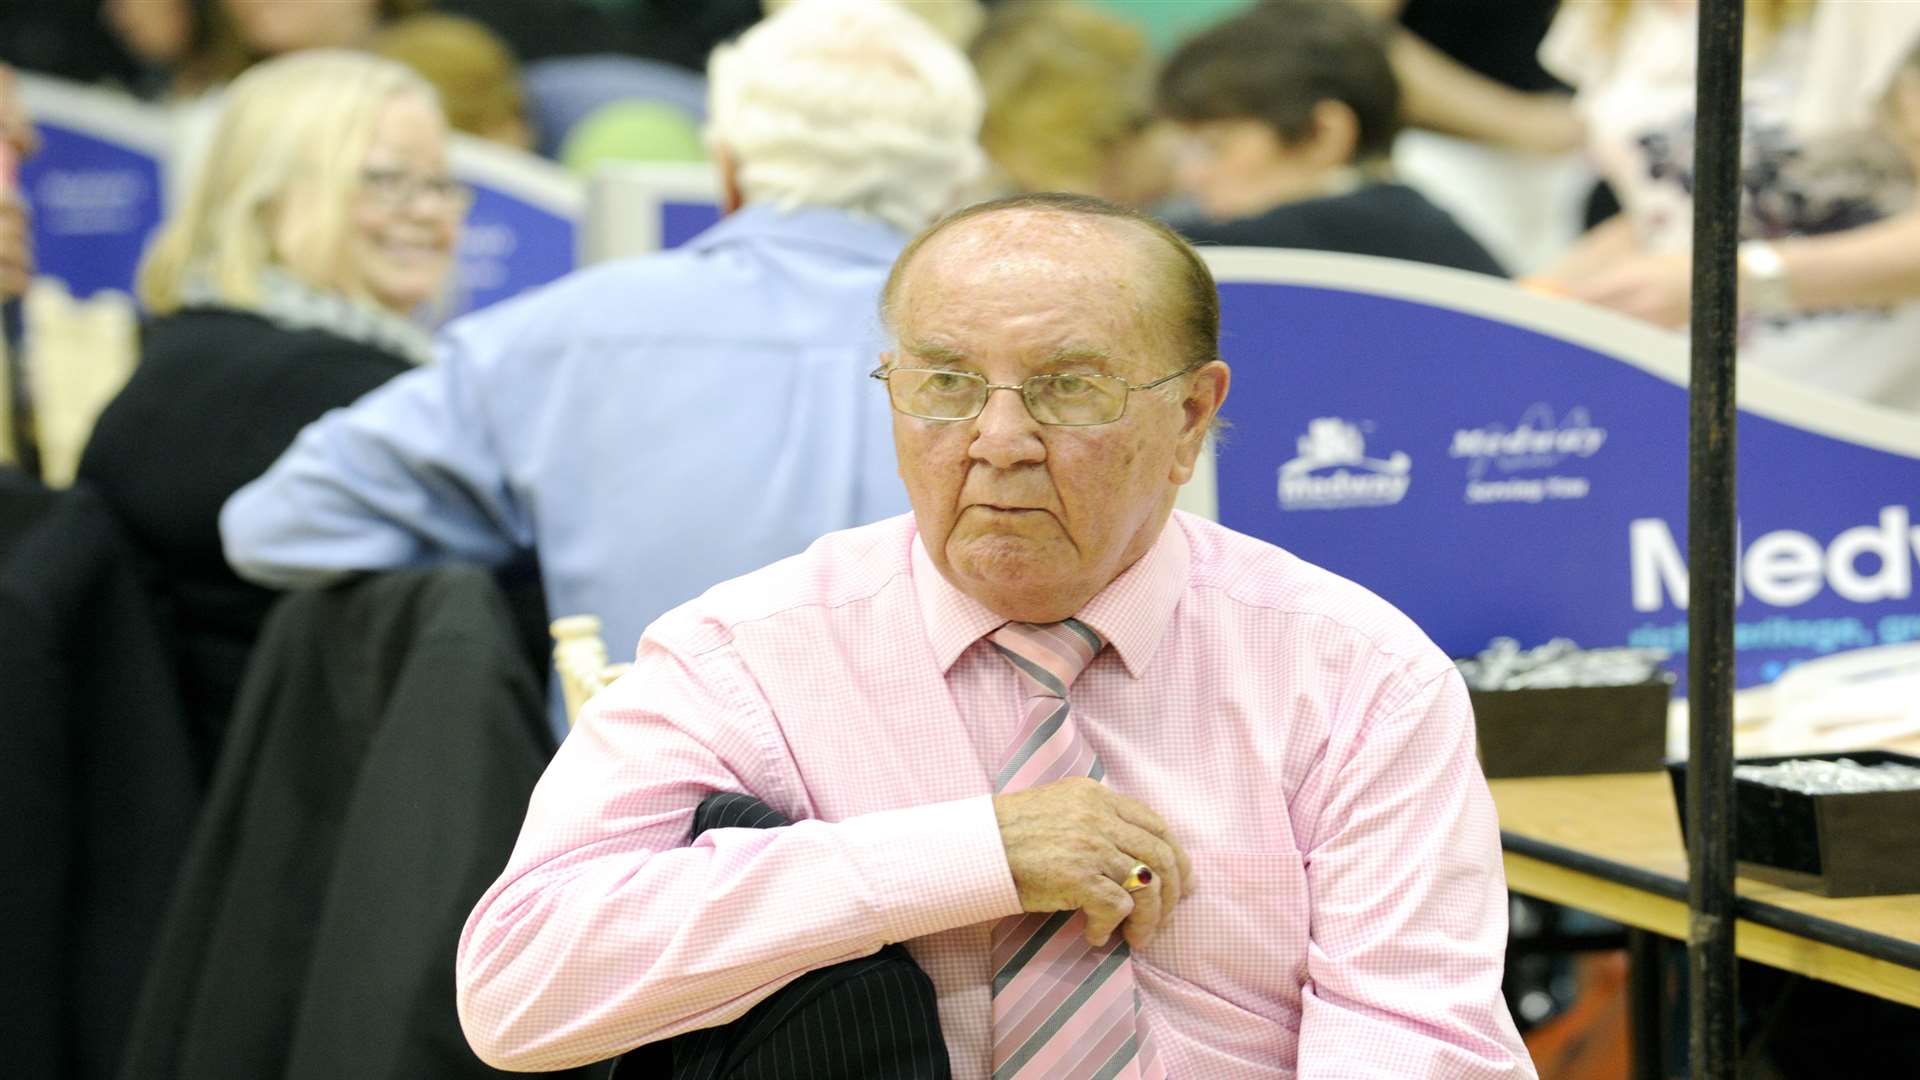 Former Tory Tom Mason, now standing for Ukip, looks thoughtful at the count